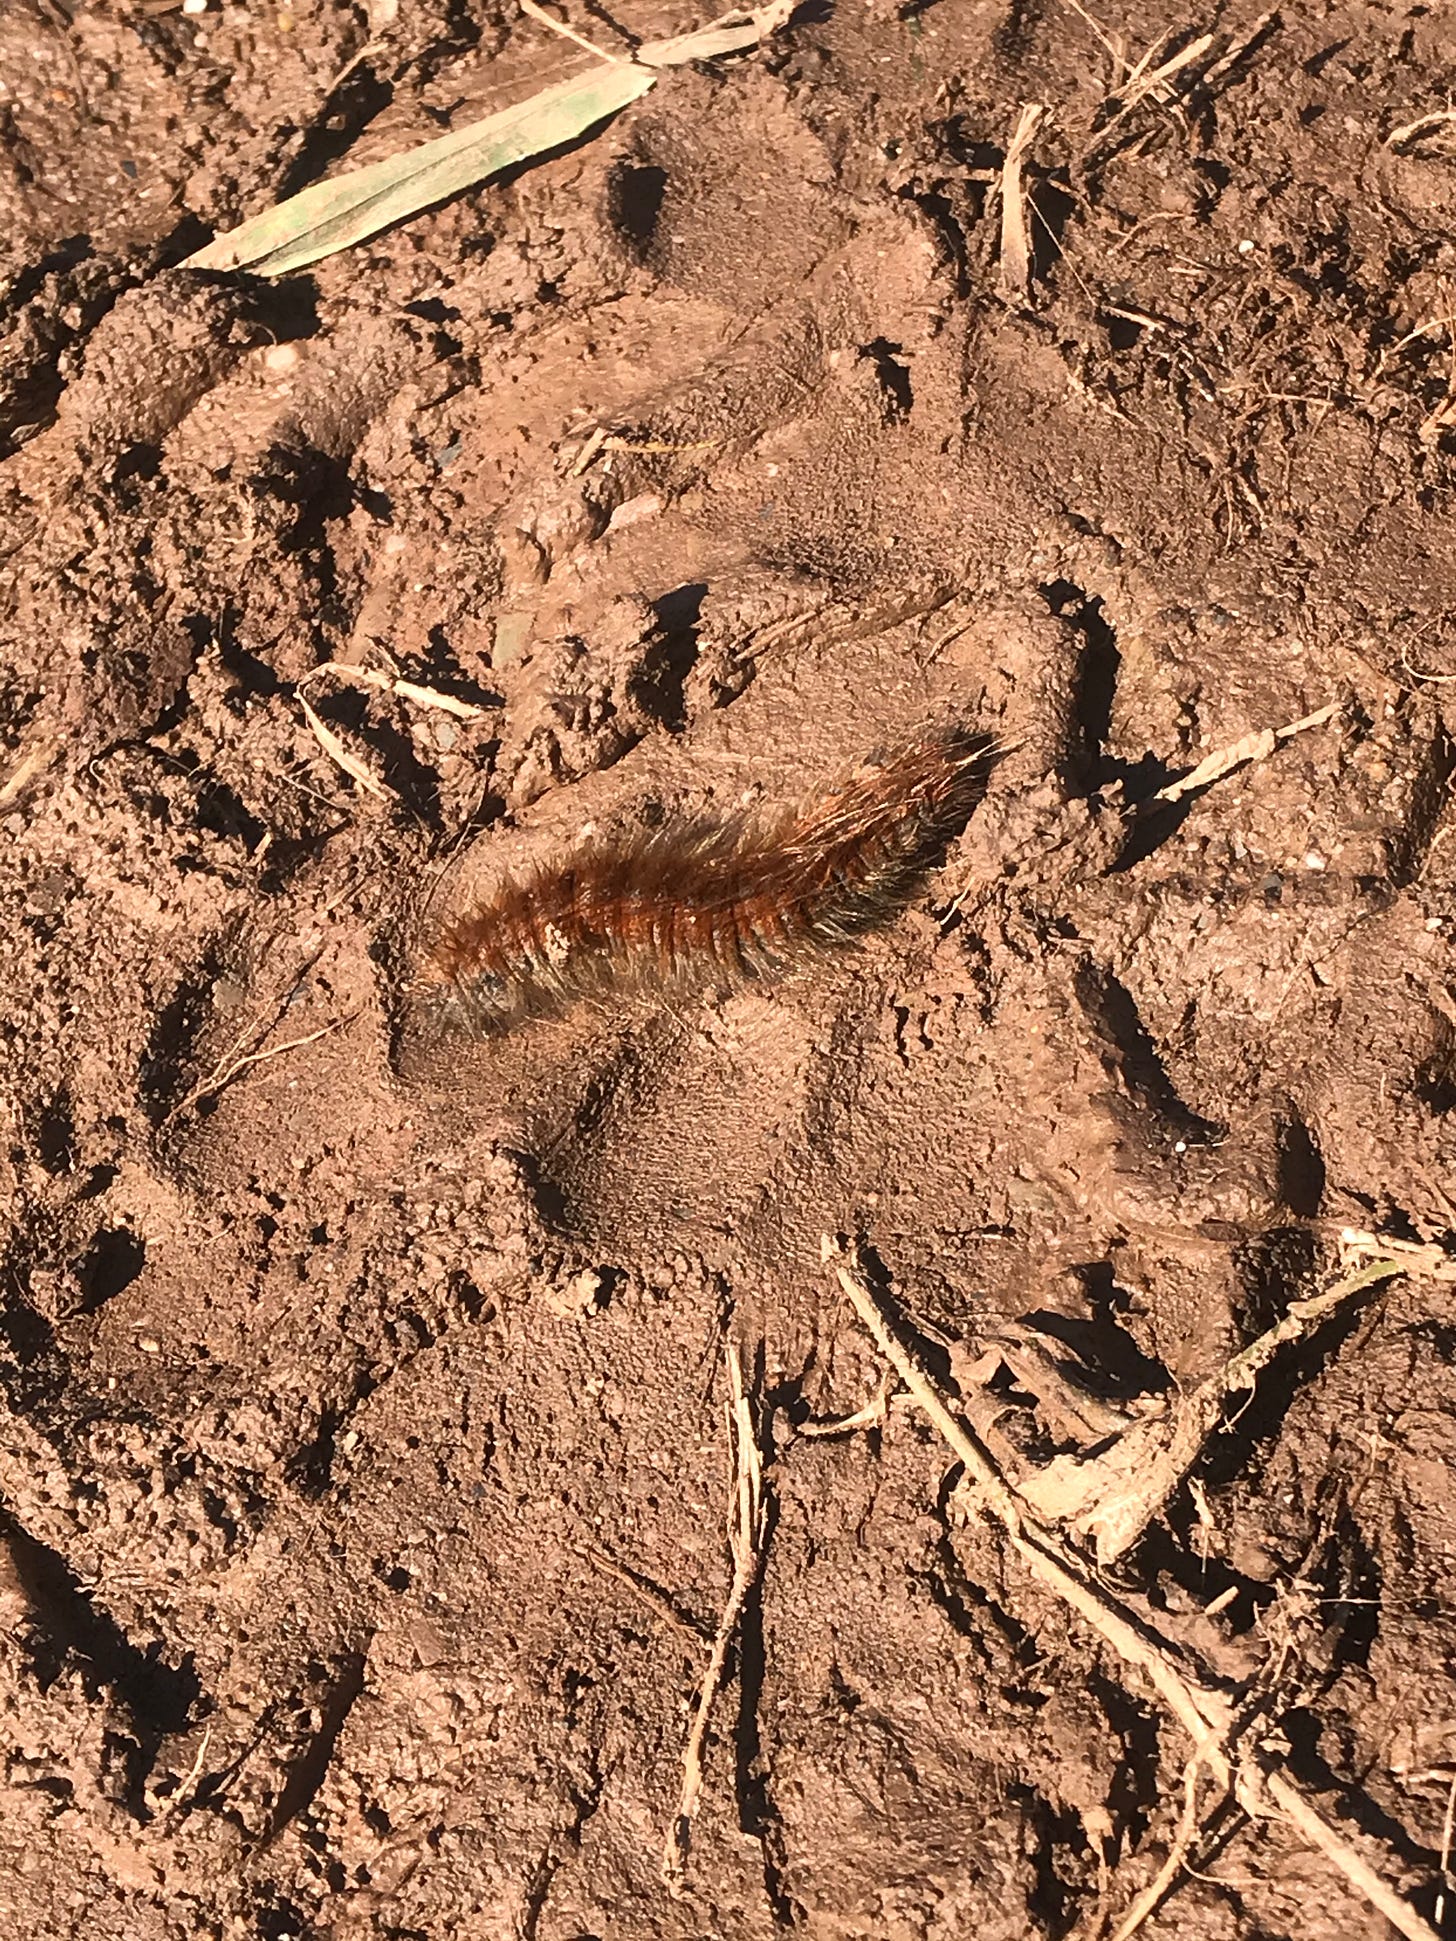 Photo of a brown hairy caterpillar on muddy footpath